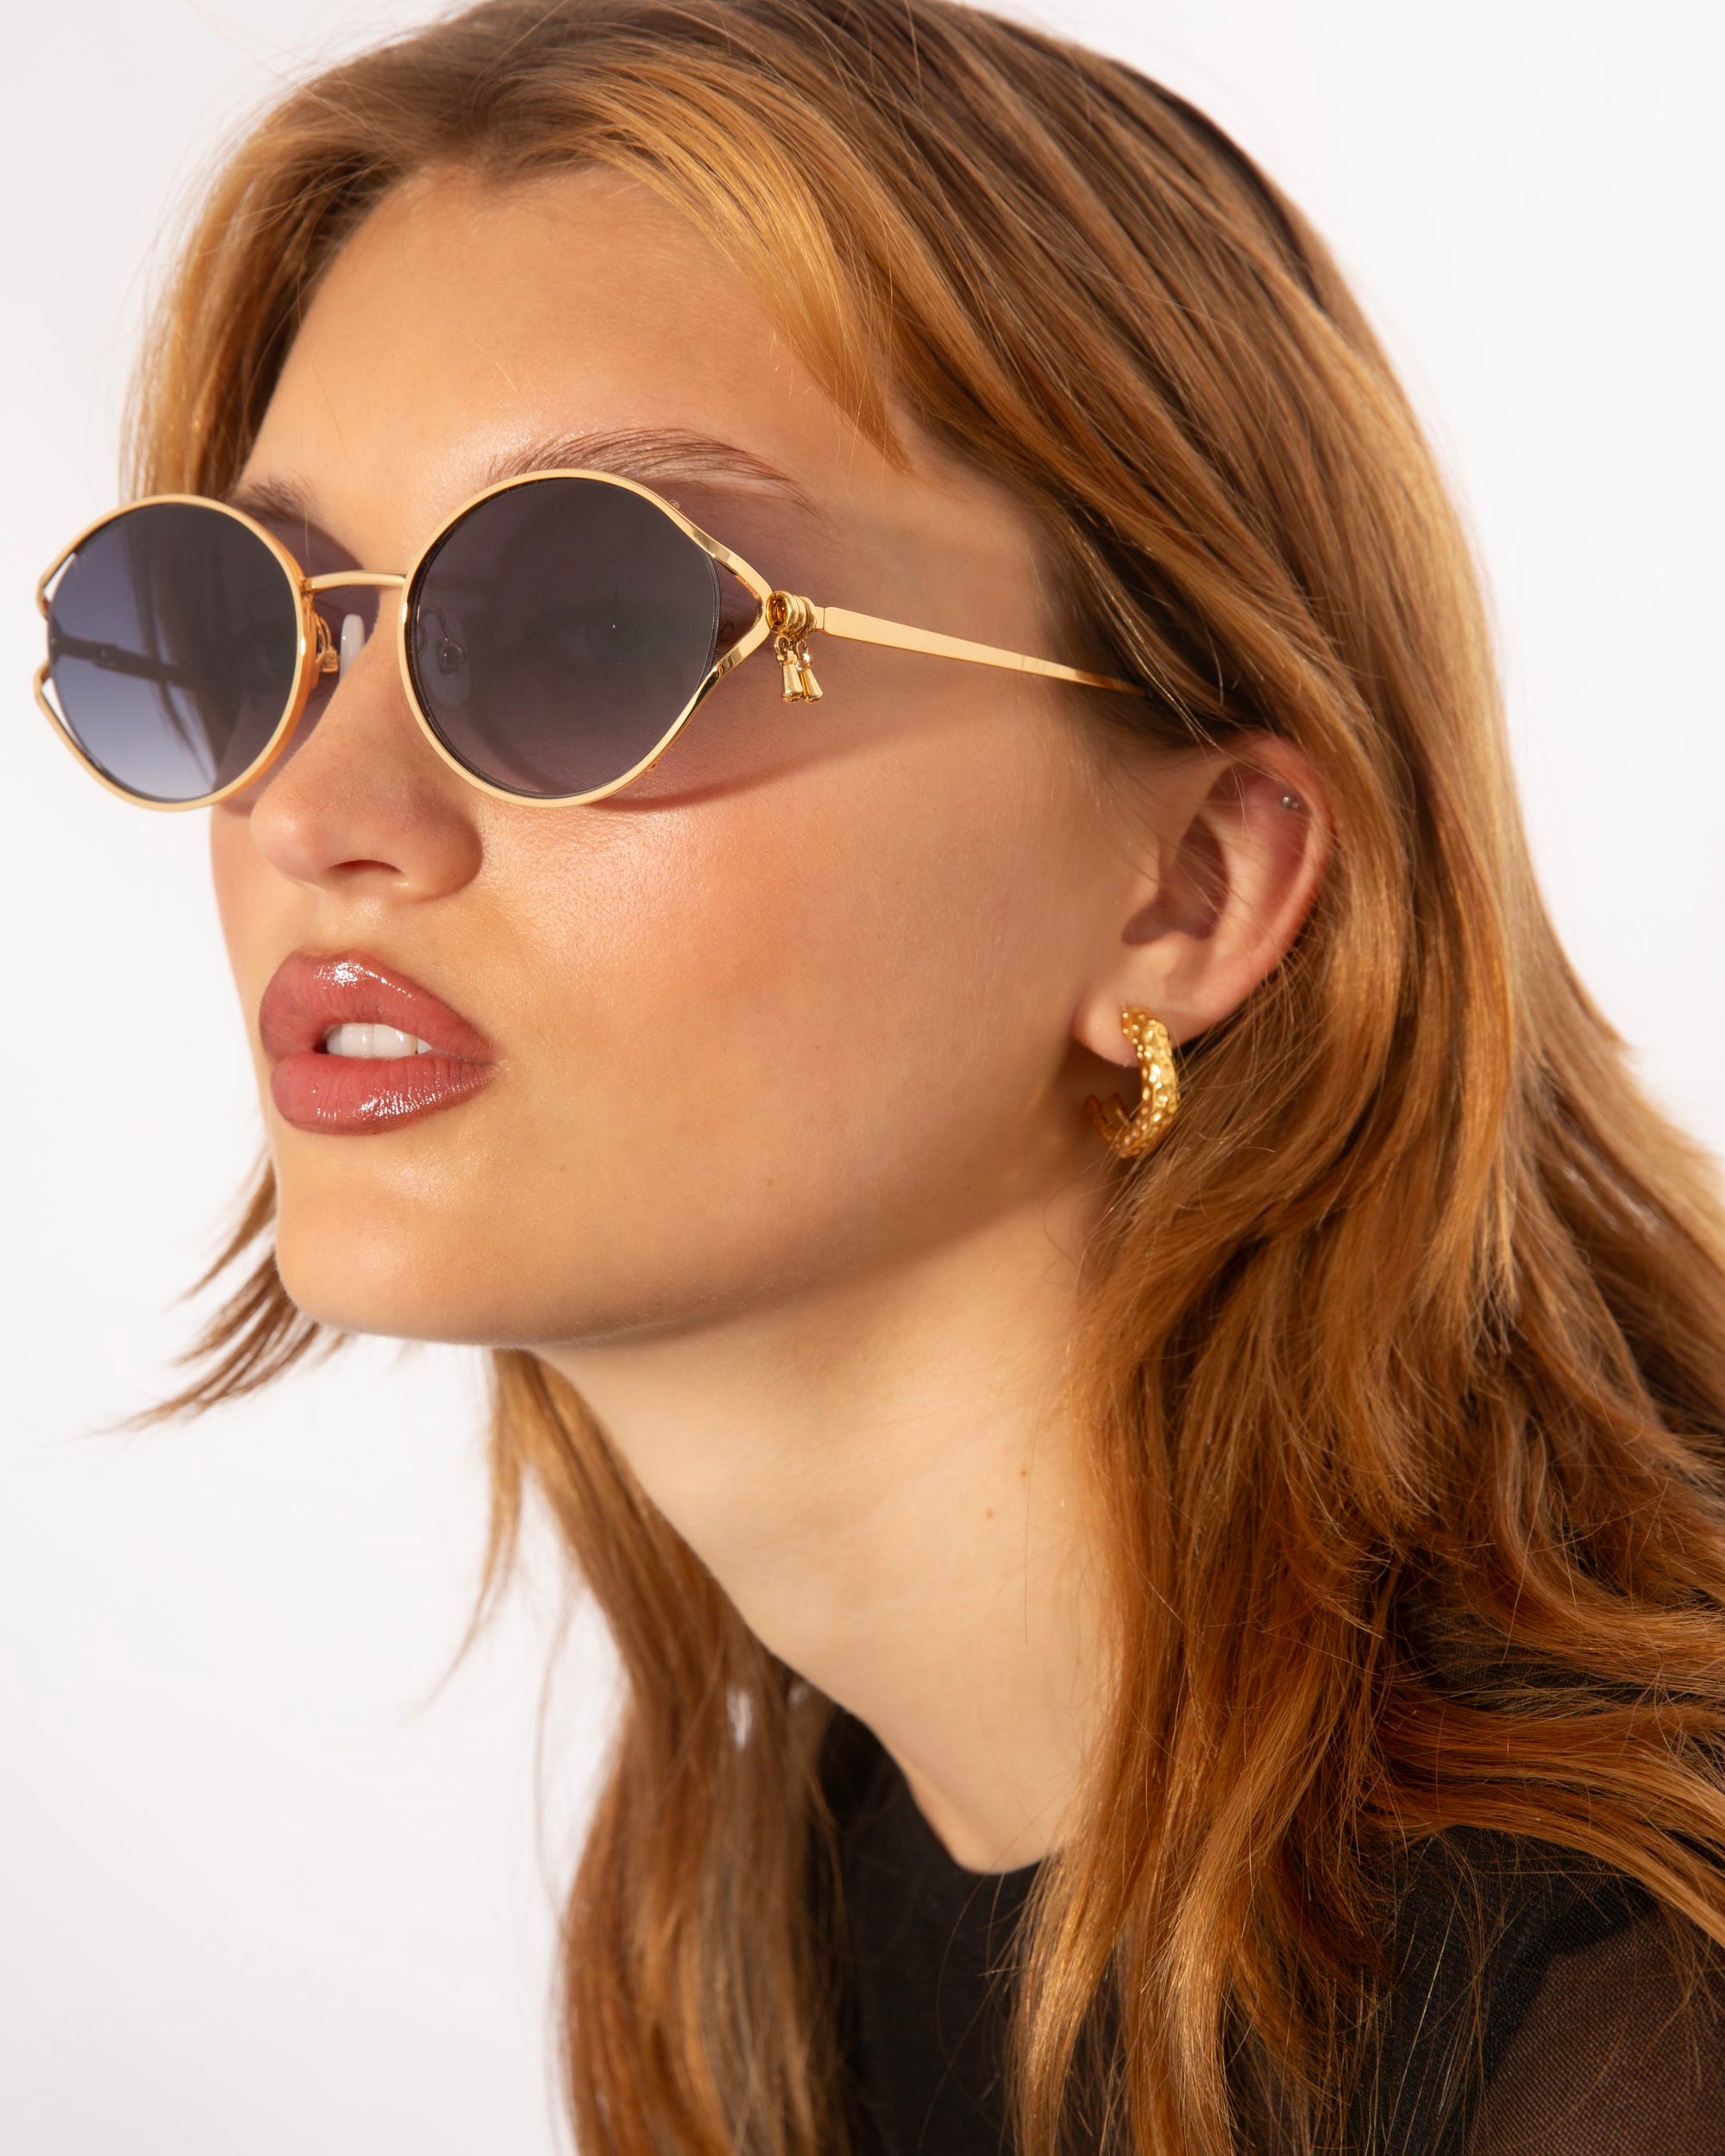 A person with long, wavy, light brown hair is wearing round, gold-rimmed sunglasses from For Art's Sake® featuring jade-stone nose pads and gold hoop earrings. They are looking slightly to the side with a neutral expression. The background is plain white. The sunglasses are called Sky.